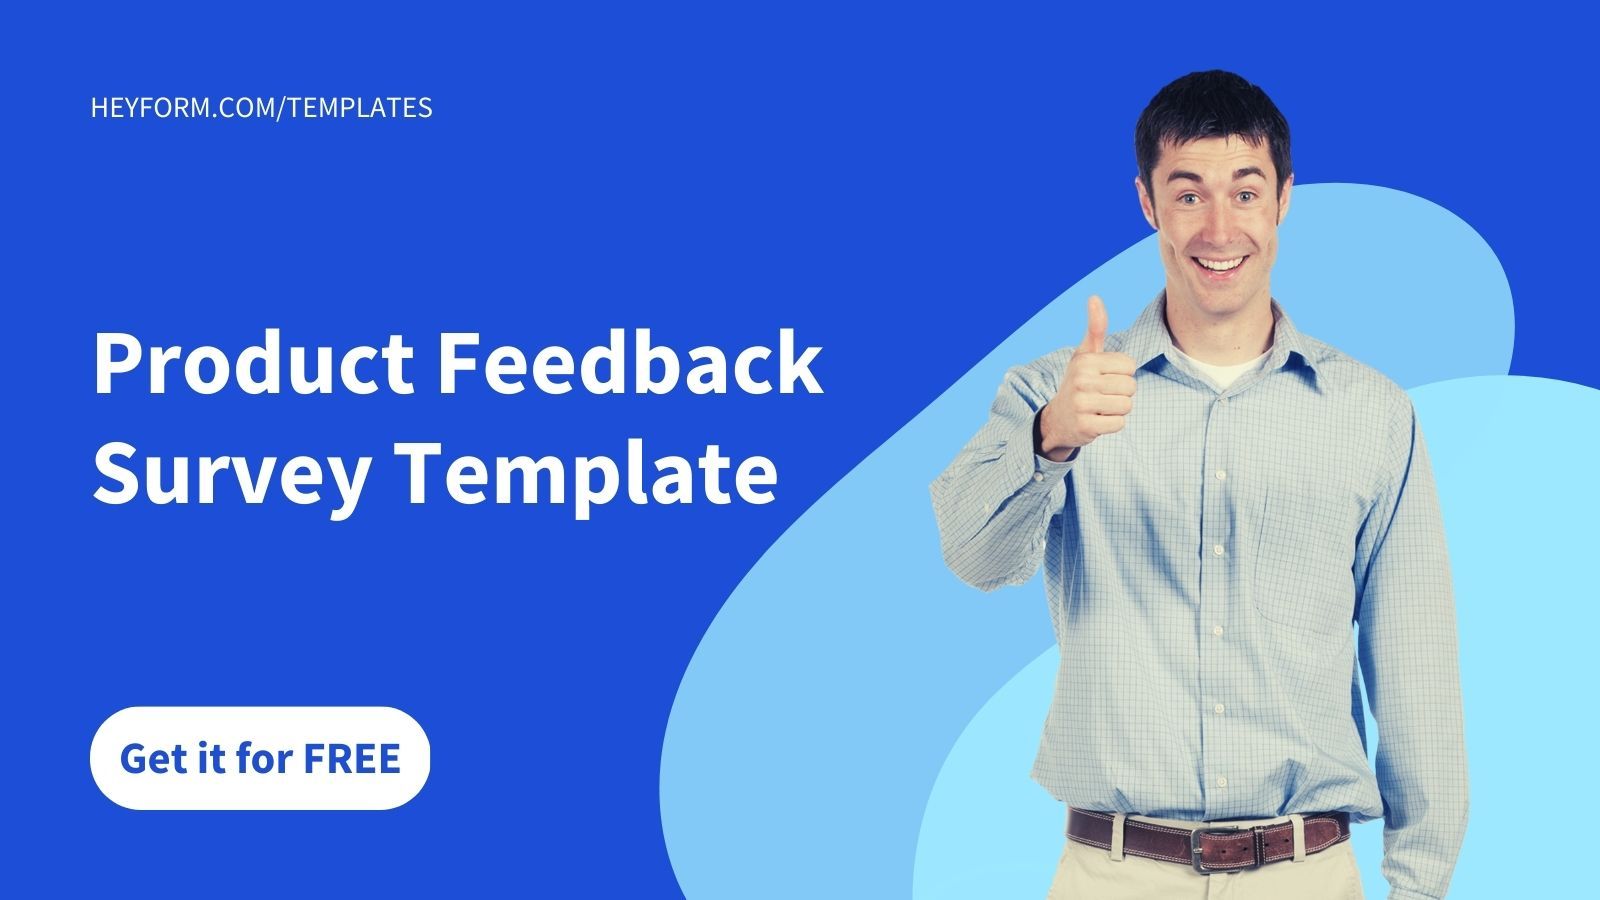 Get A Copy of Product Feedback Survey Template